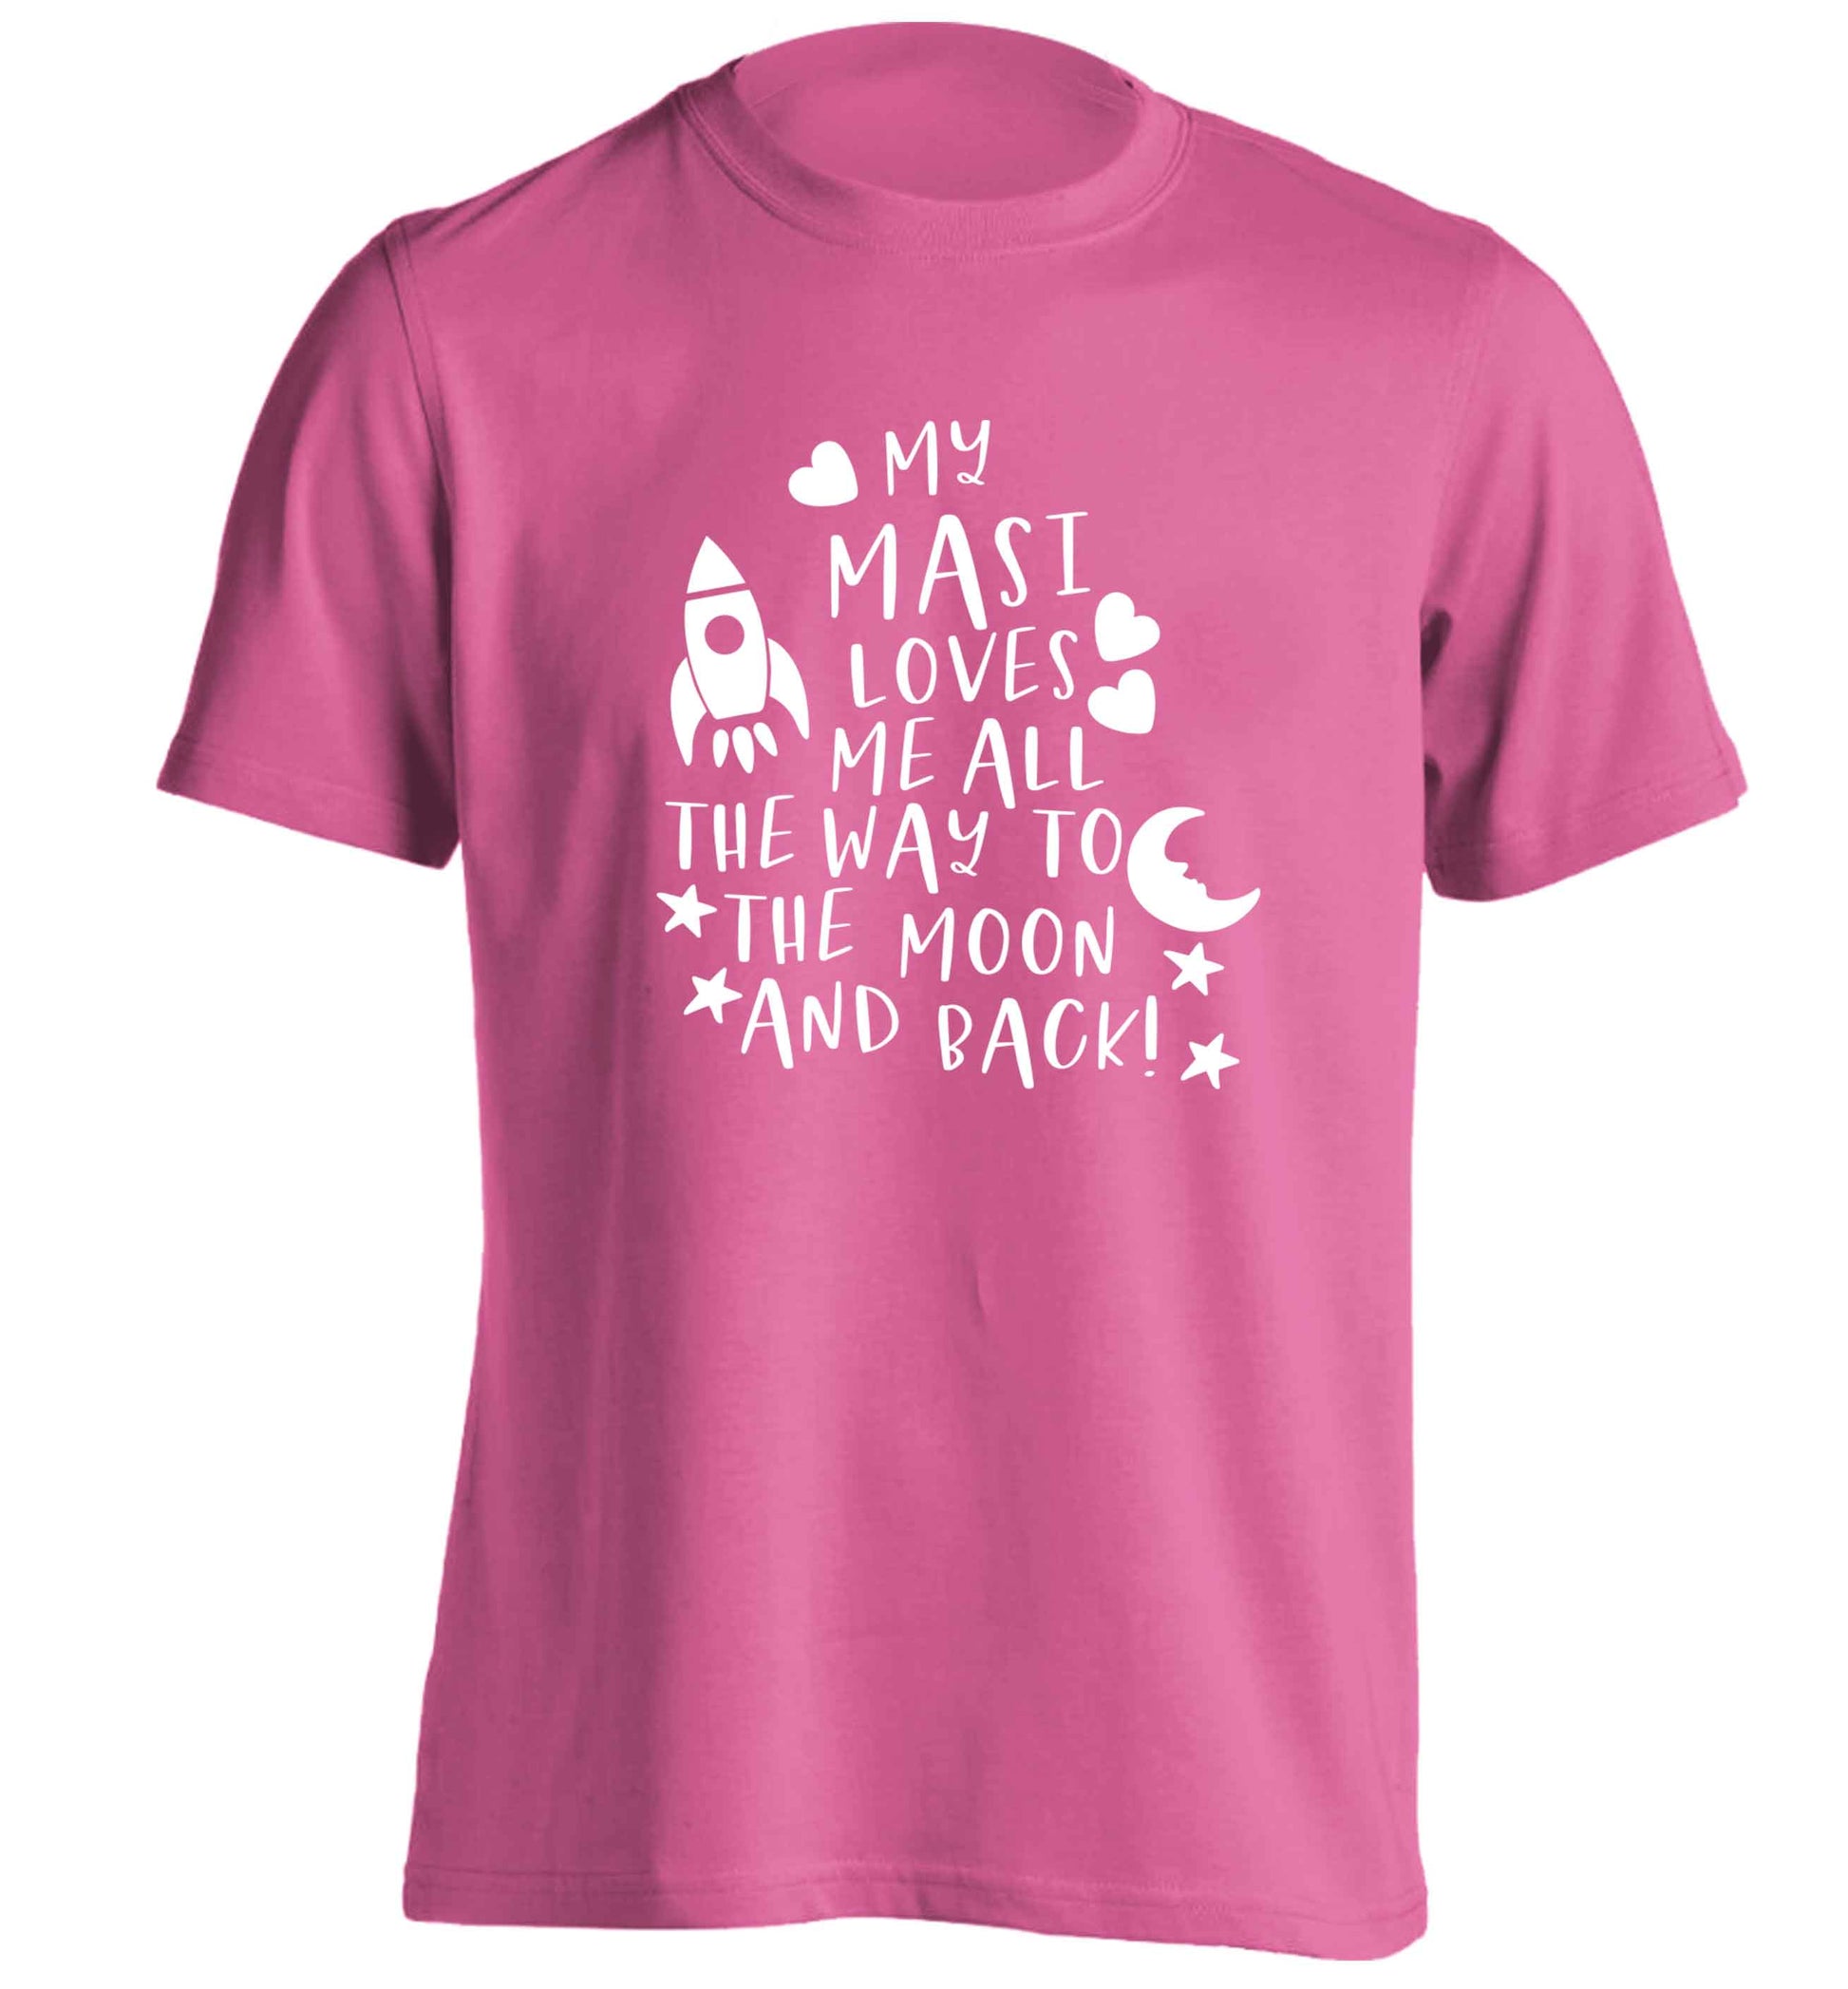 My masi loves me all the way to the moon and back adults unisex pink Tshirt 2XL